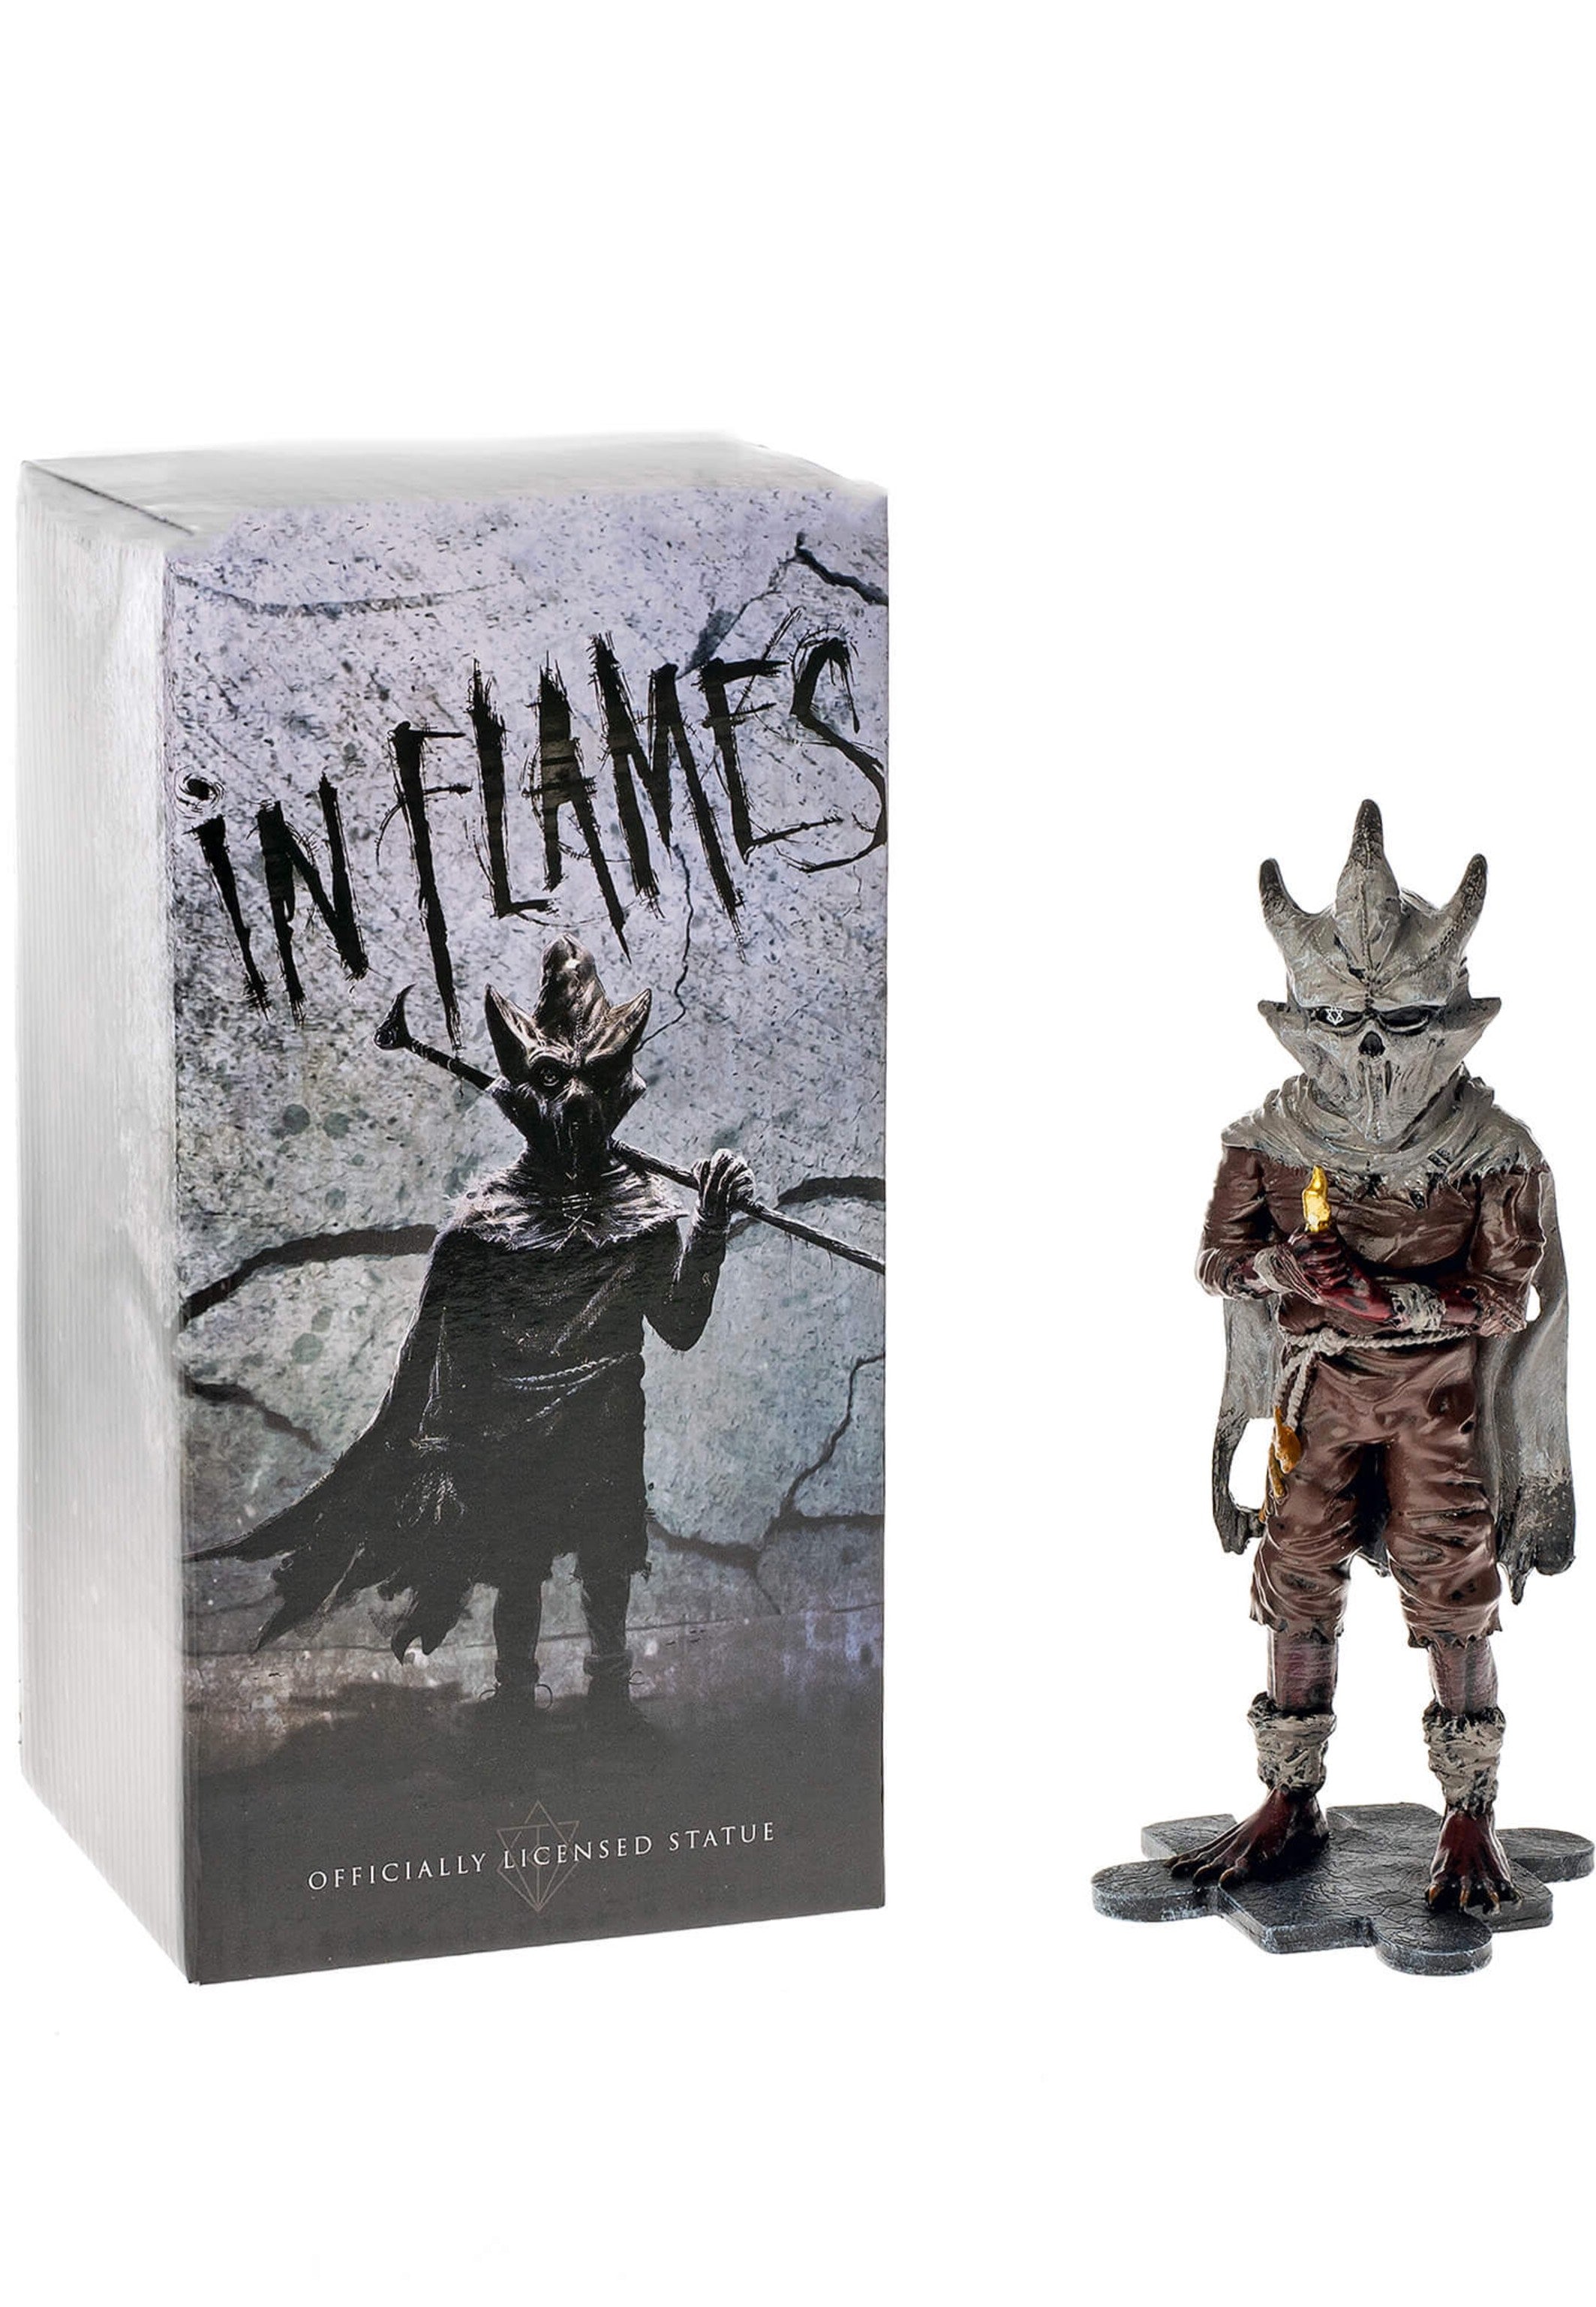 In Flames - The Mask - Figure